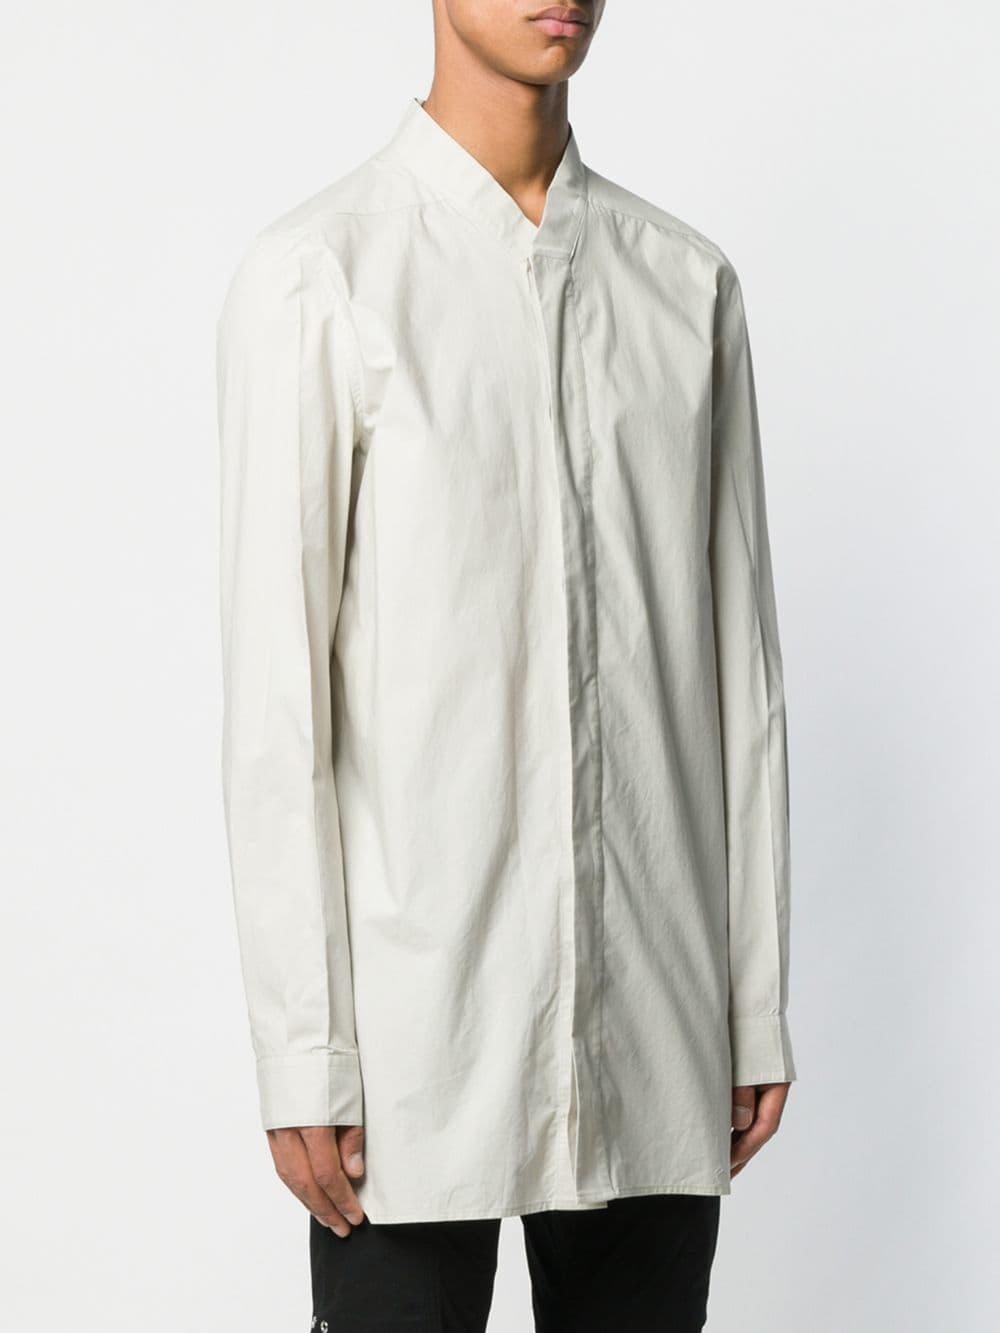 Rick Owens Leather Collarless Button-up Shirt in Grey (Gray) for Men - Lyst